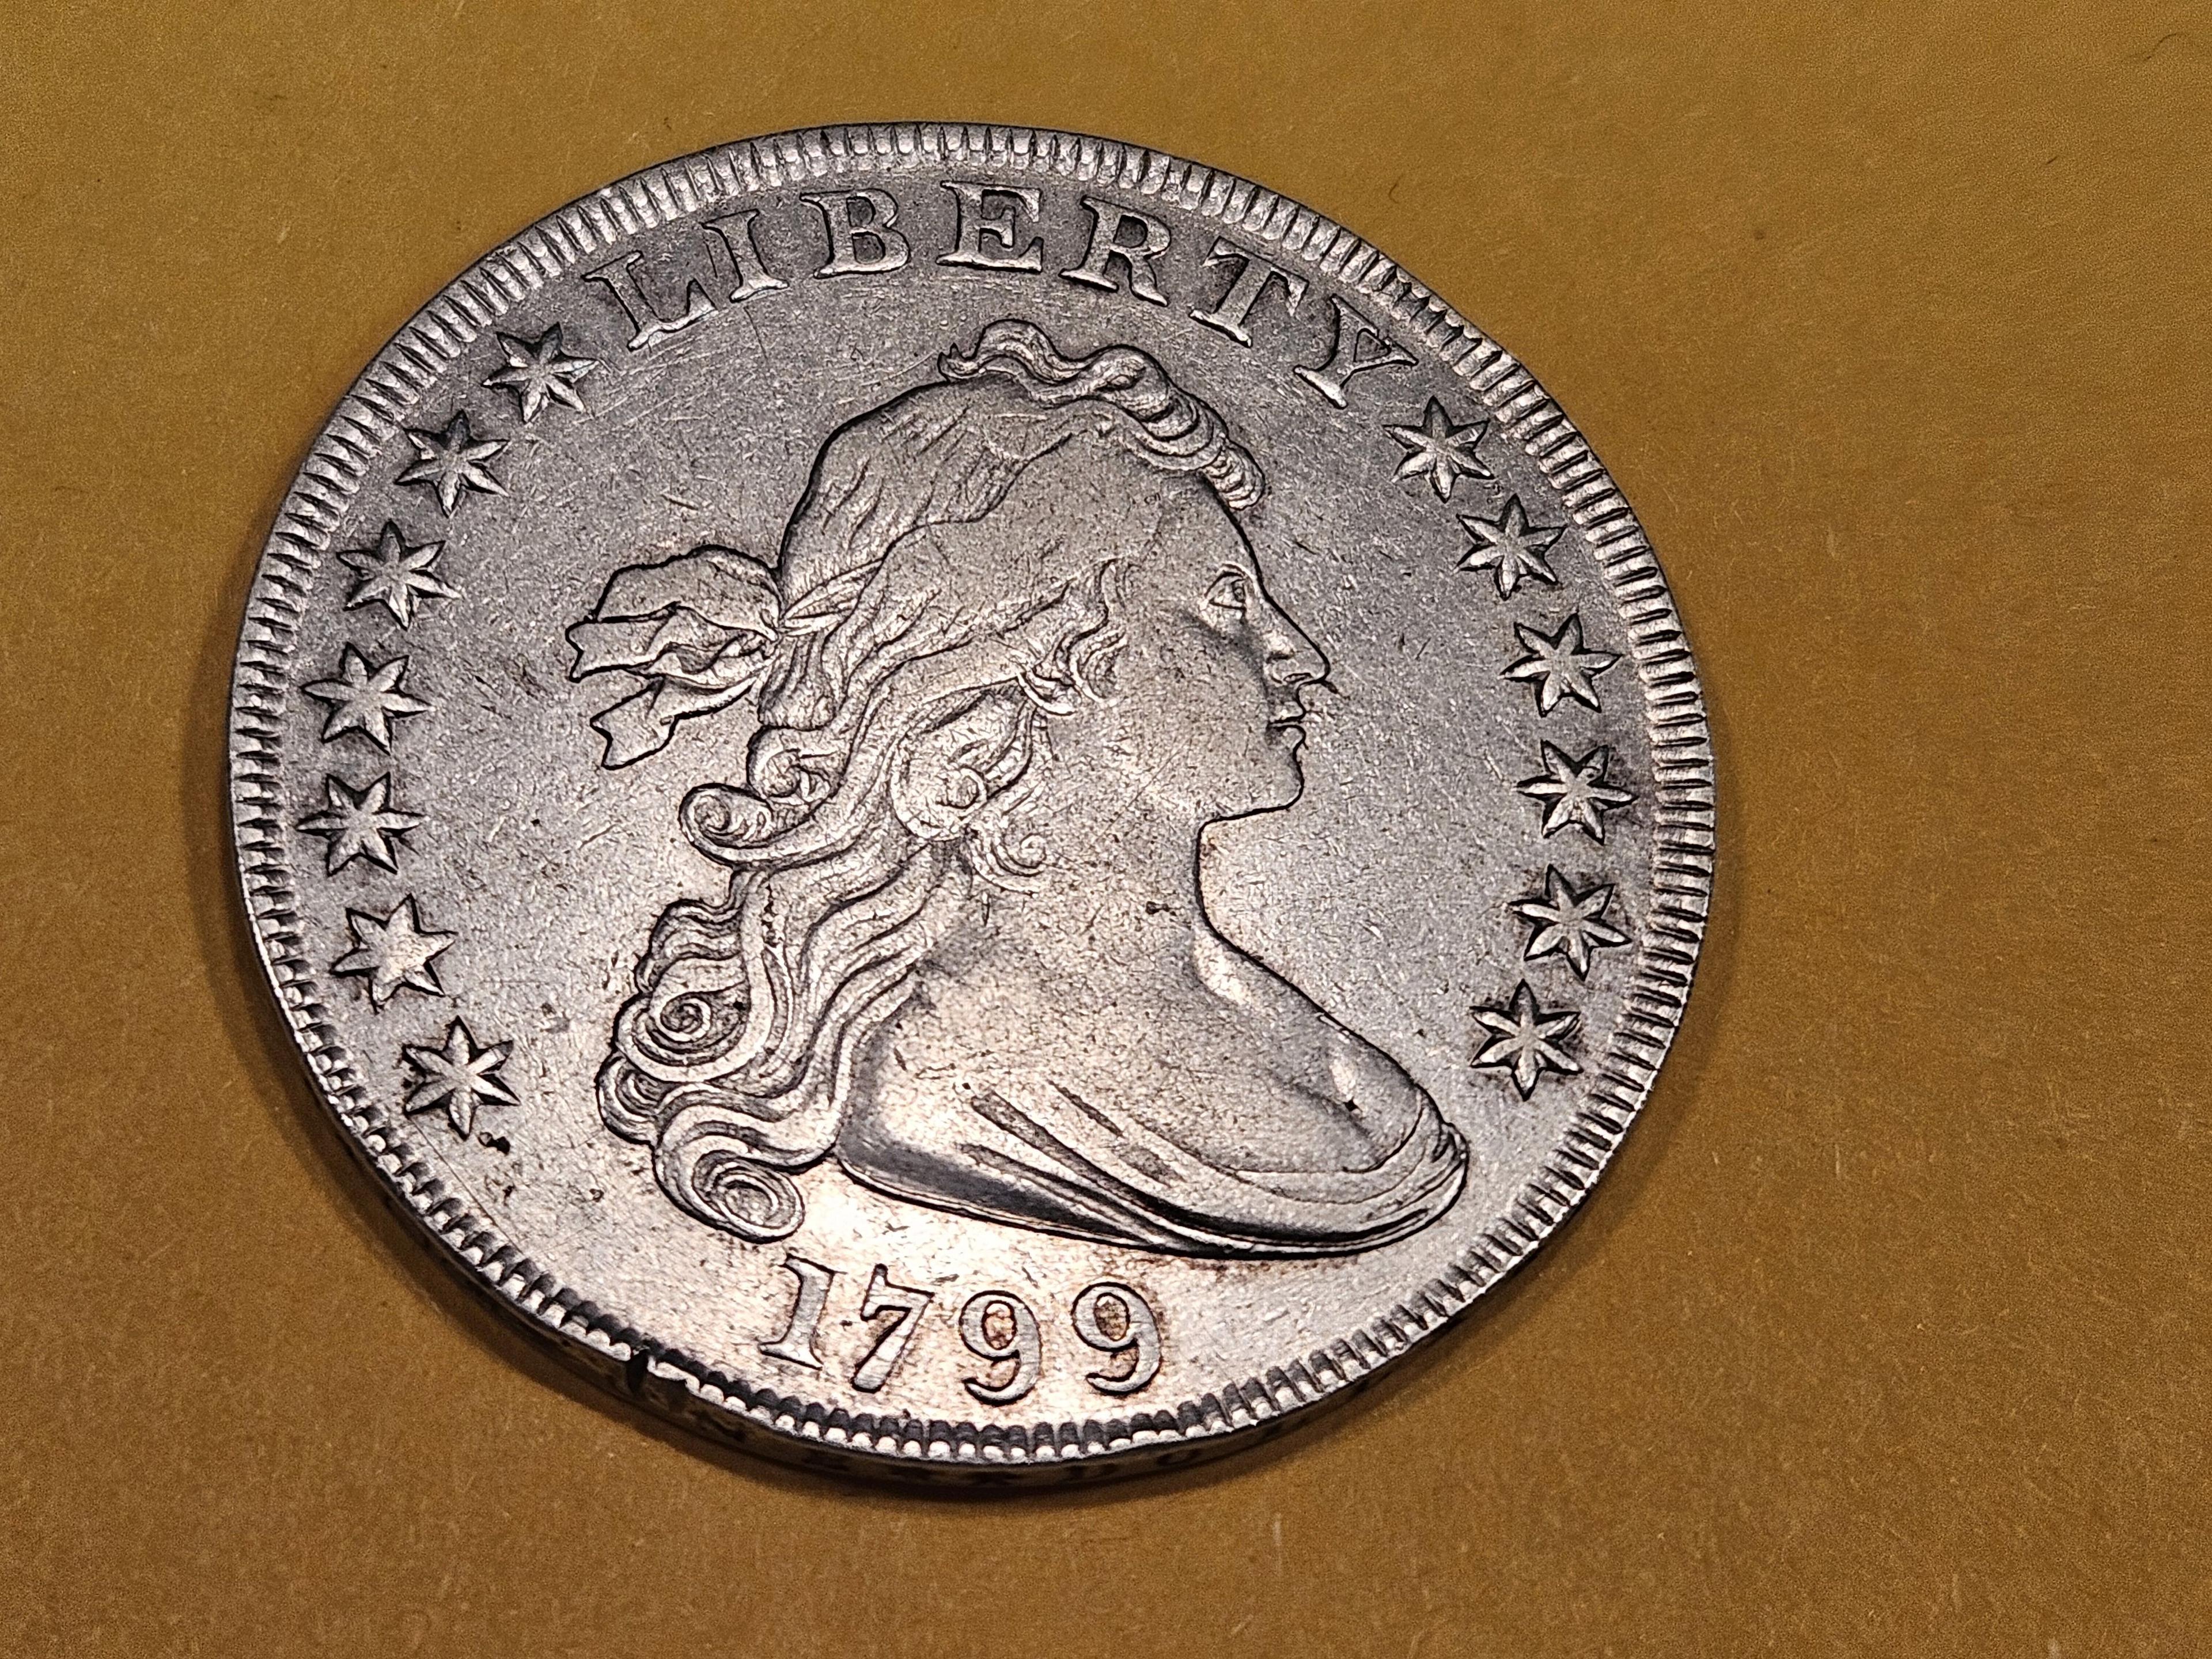 *** AUCTION HIGHLIGHT *** 1799 Draped Bust Dollar in Very Fine Plus